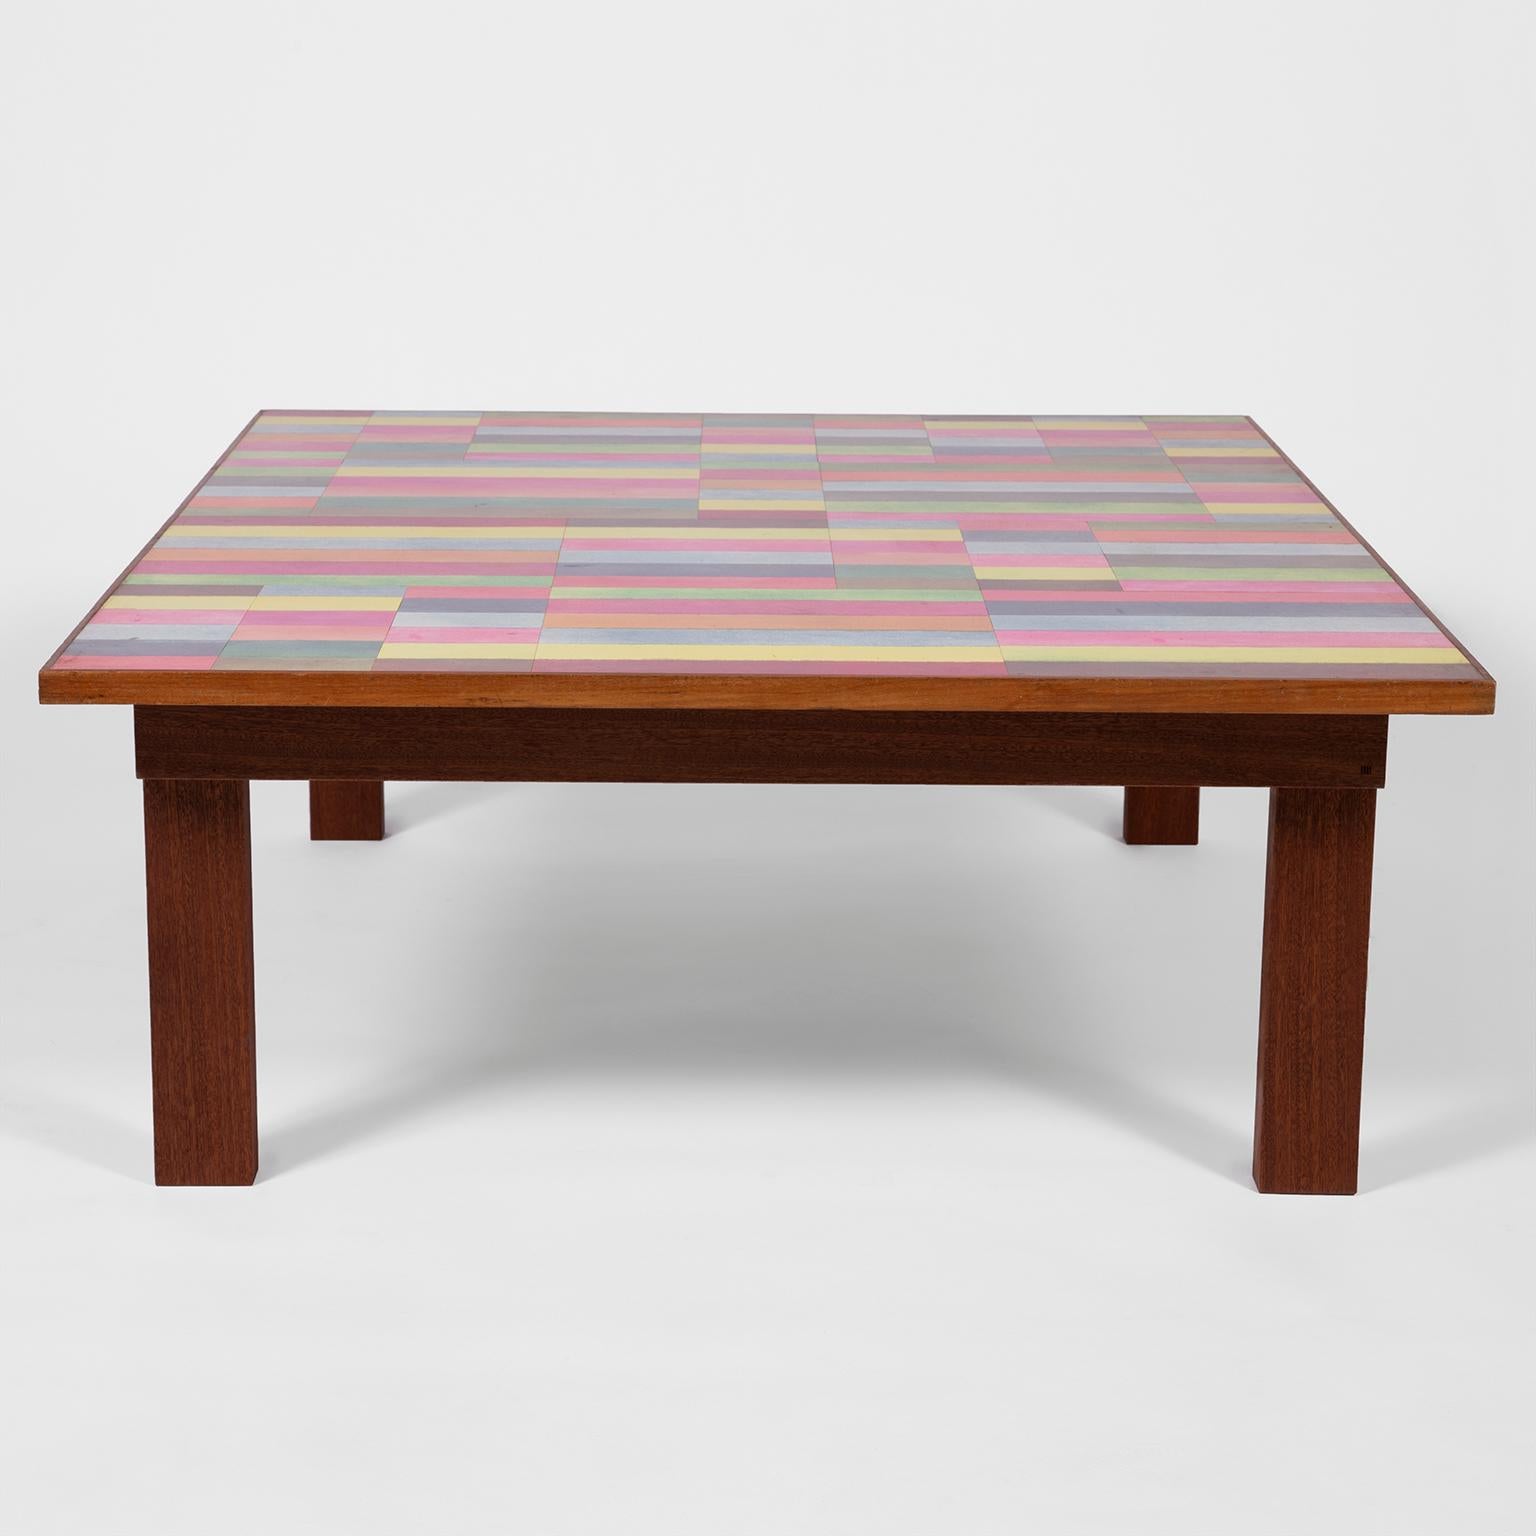 Low rectangular table featuring the original 1960s laminated mix media surface art by Barry Daniels as part of the DANAD Design collective (1958-1962).
The original laminated surface art is set in a Sapele Mahogany, handcrafted in the UK, based on